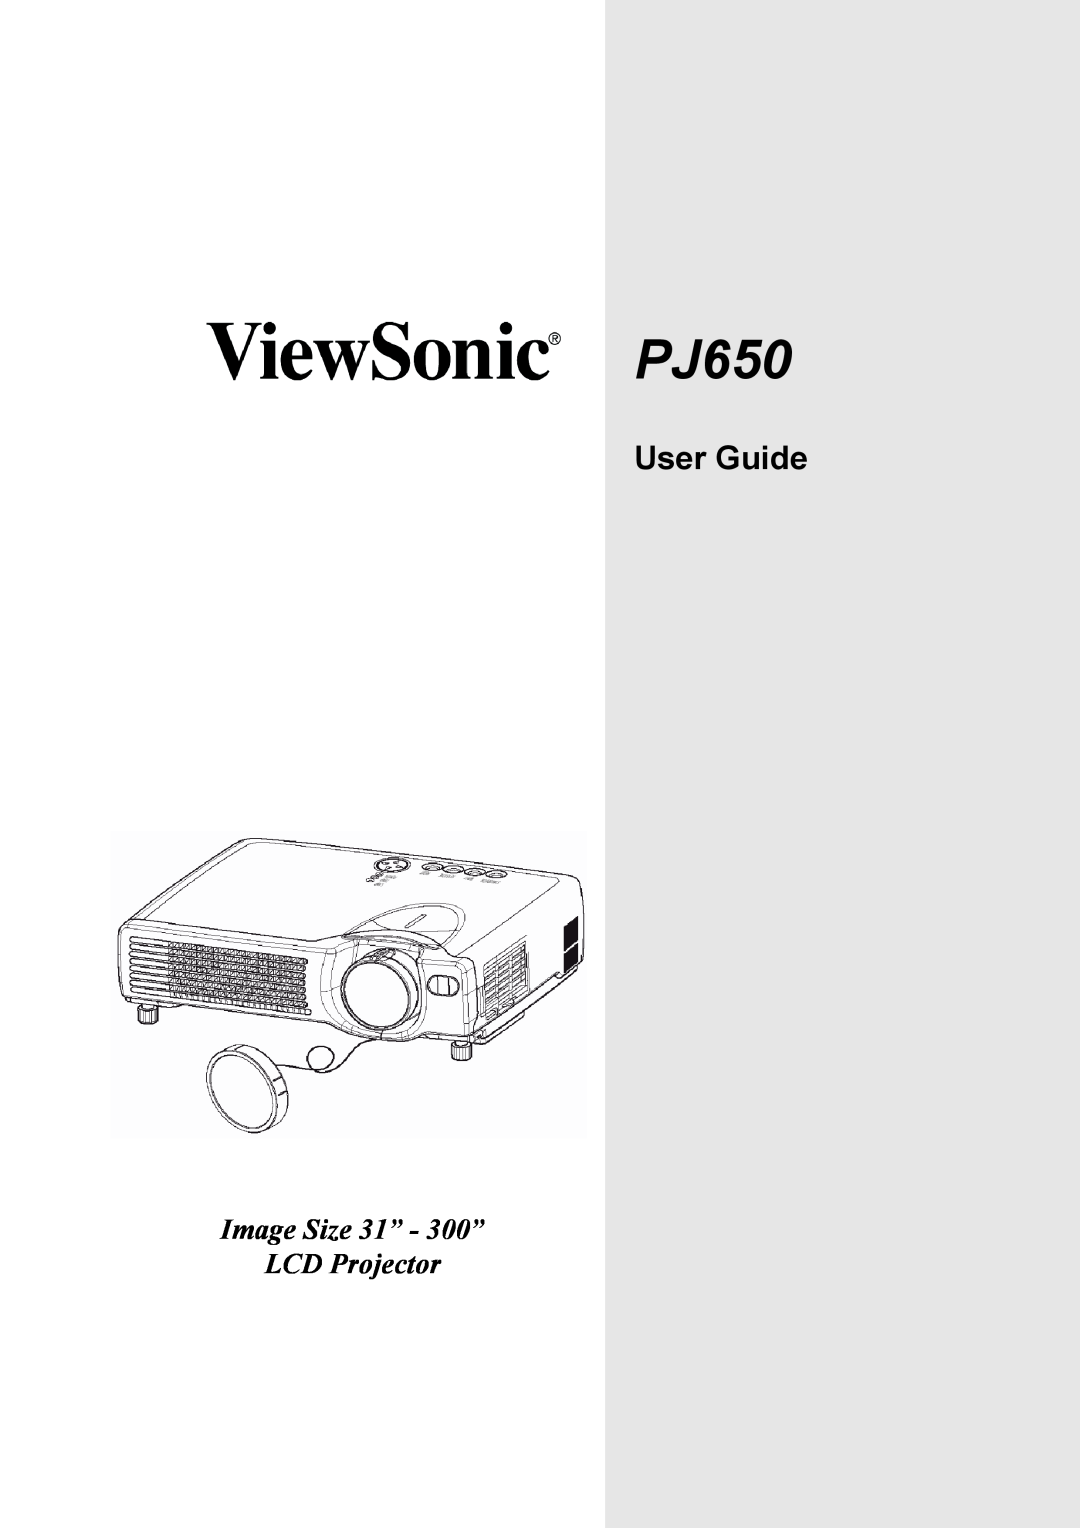 ViewSonic PJ650 manual User Guide, Image Size 31” - 300” LCD Projector 